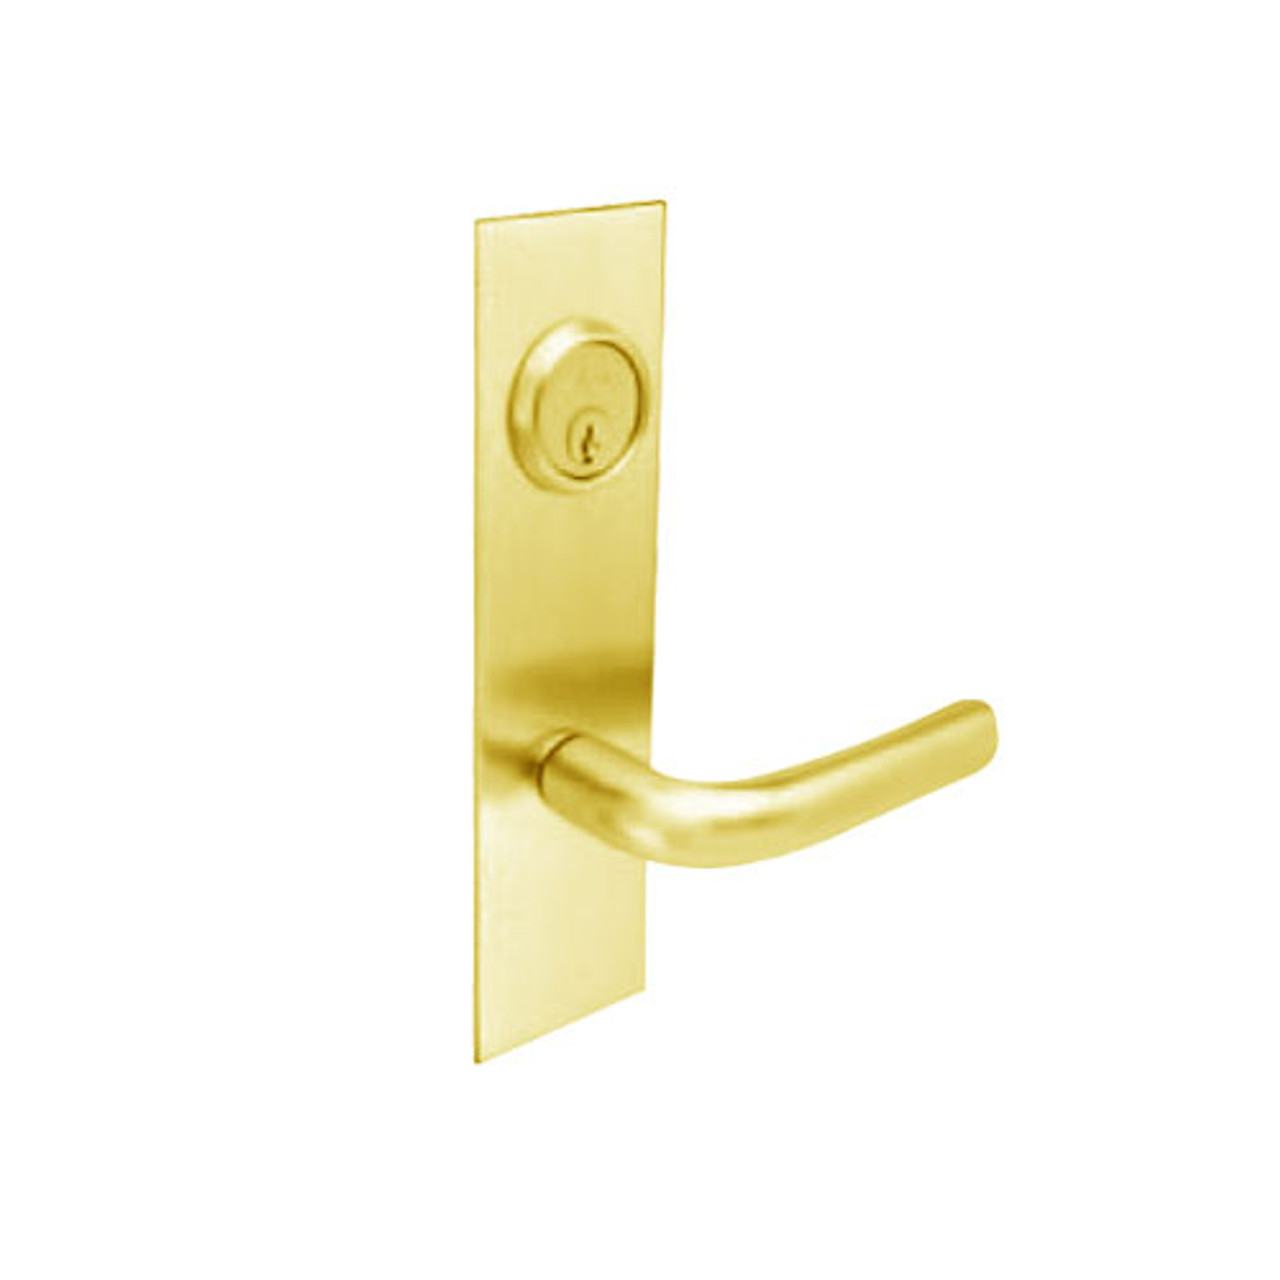 BM17-NH-03 Arrow Mortise Lock BM Series Classroom Lever with Neo Design and H Escutcheon in Bright Brass